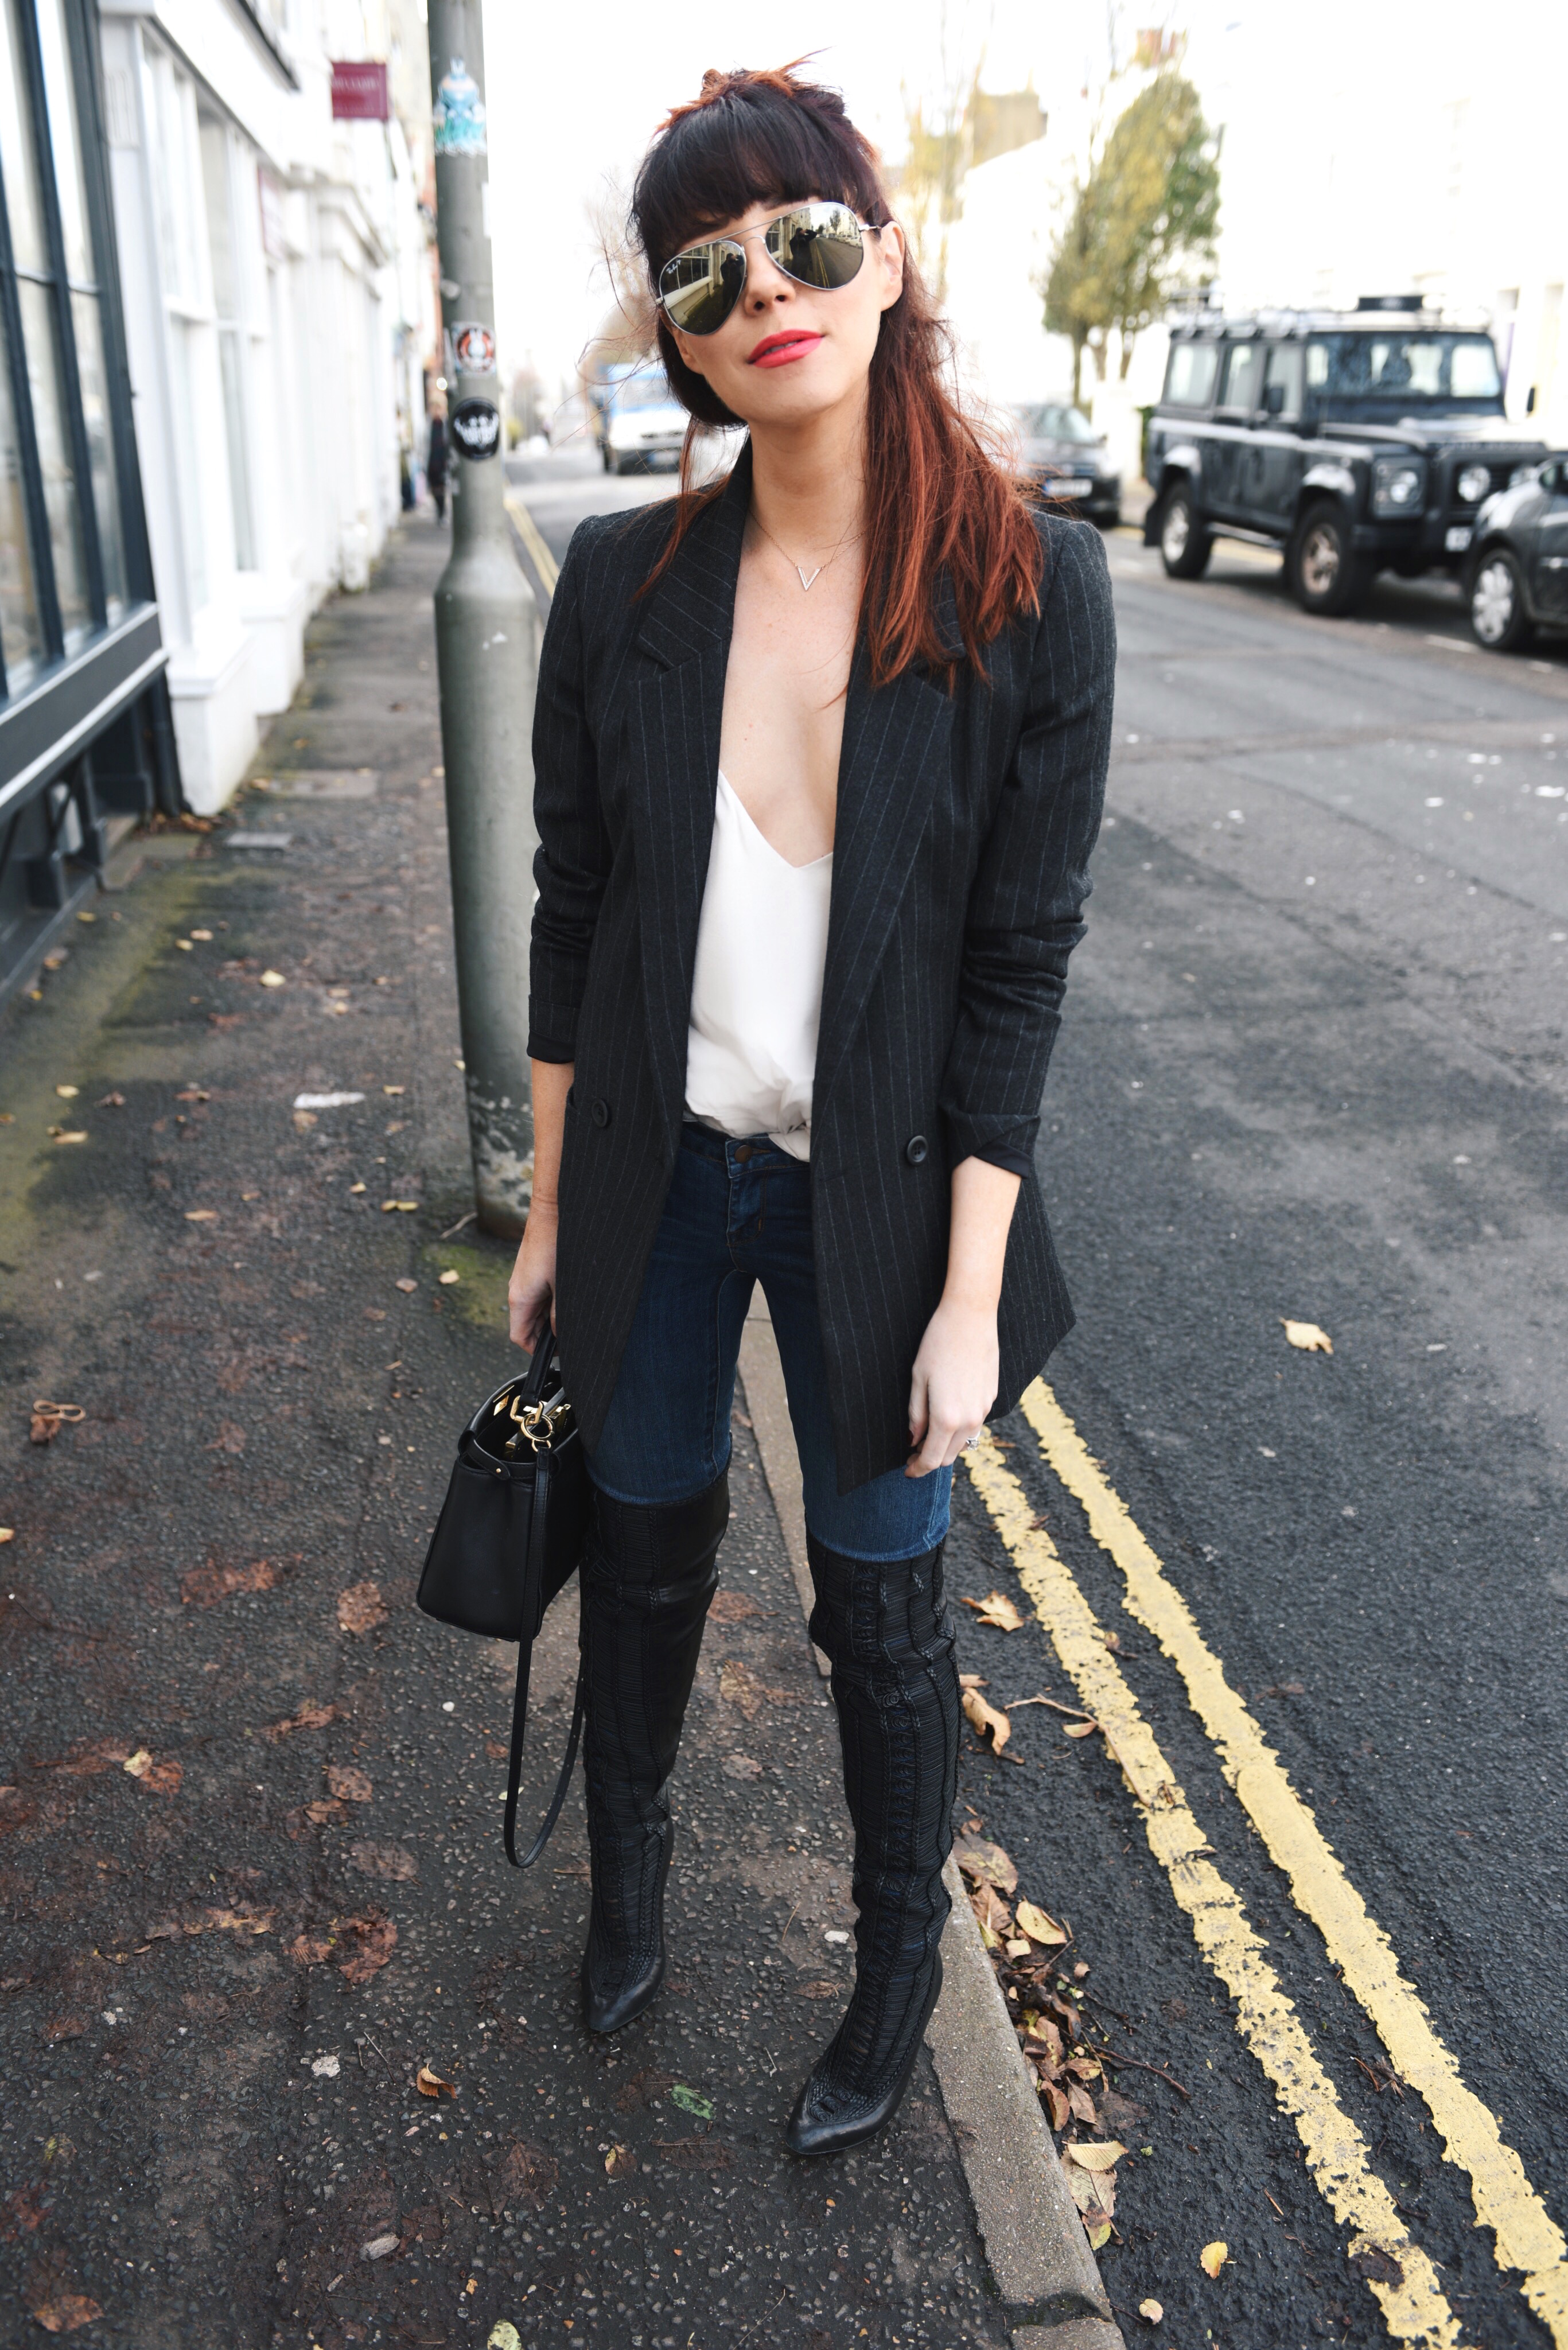 pinstripe blazer and over the knee boots